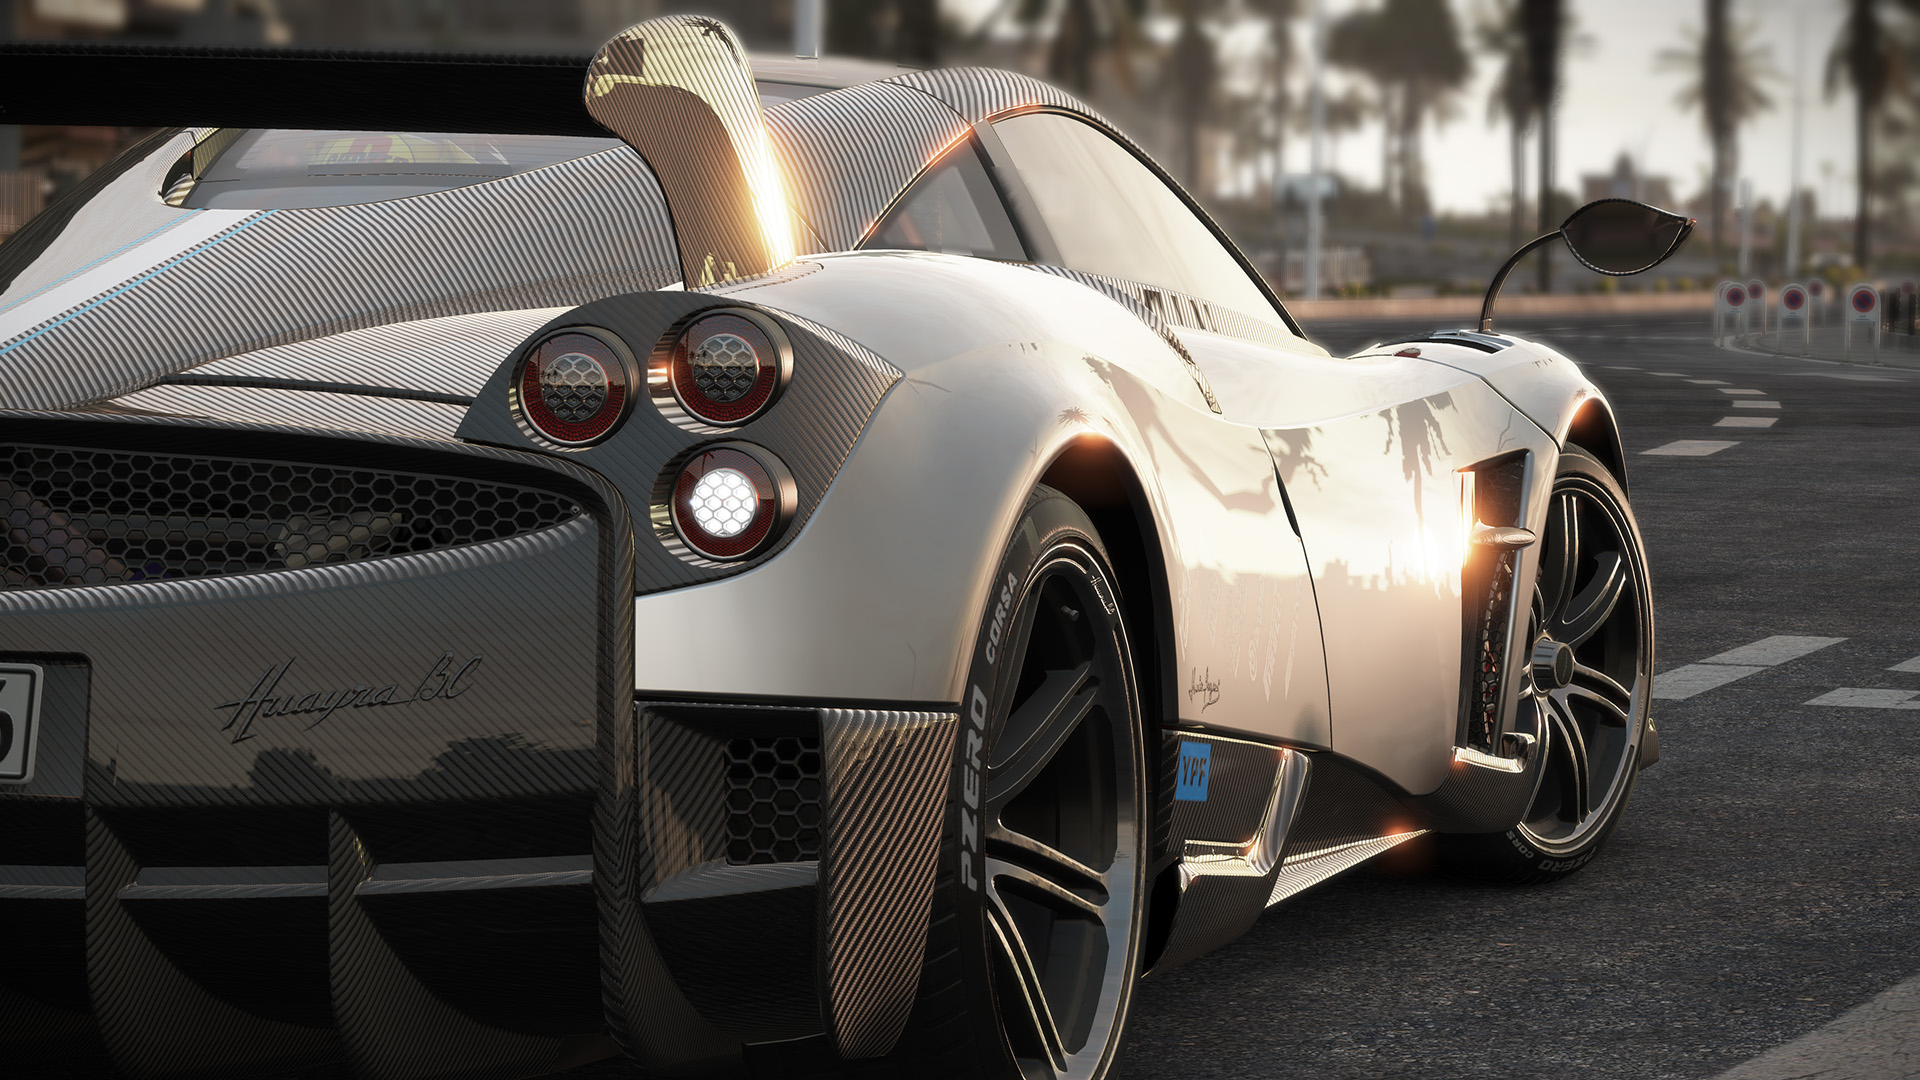 Project CARS Pagani Edition released for free on Steam with 4K and VR support